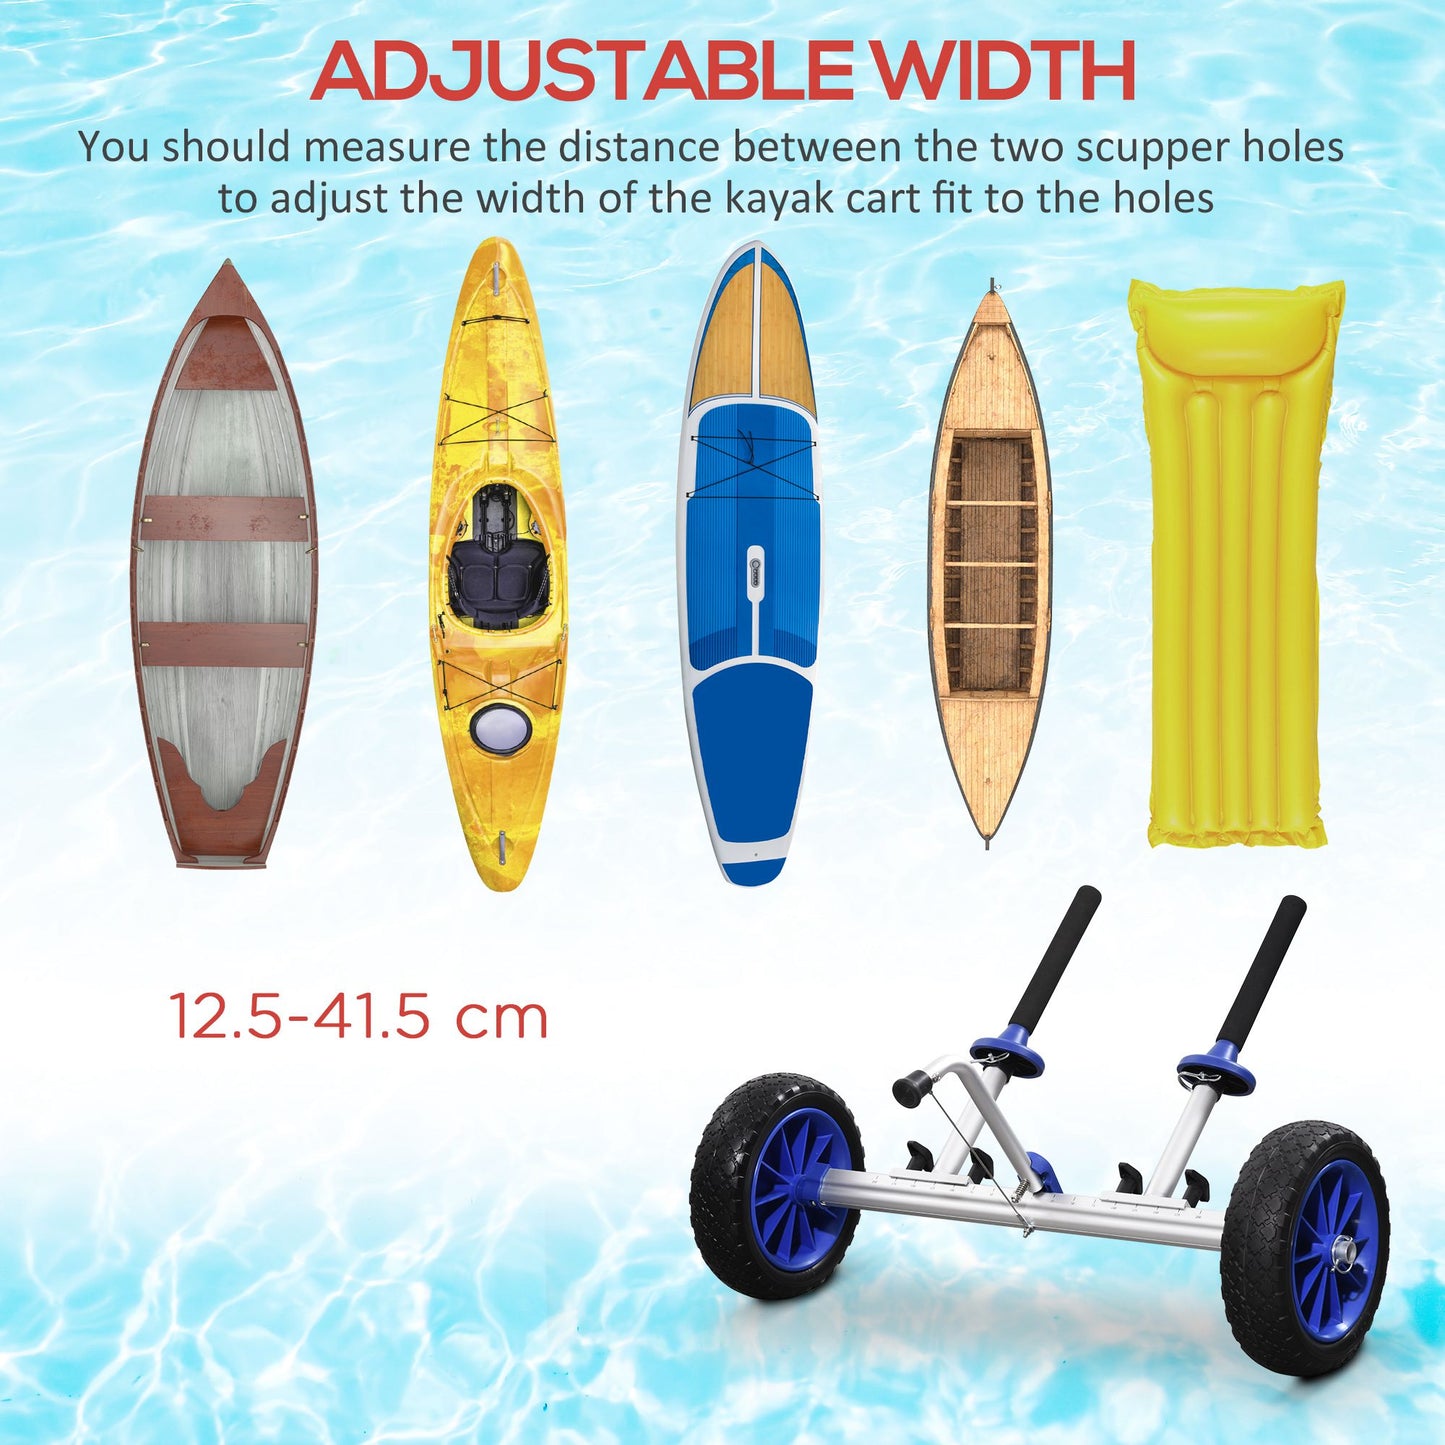 Aluminum Kayak Cart Adjustable Kayak Dolly with Wheels and Foldable Kickstand for Kayaks, Canoes, Paddleboards at Gallery Canada